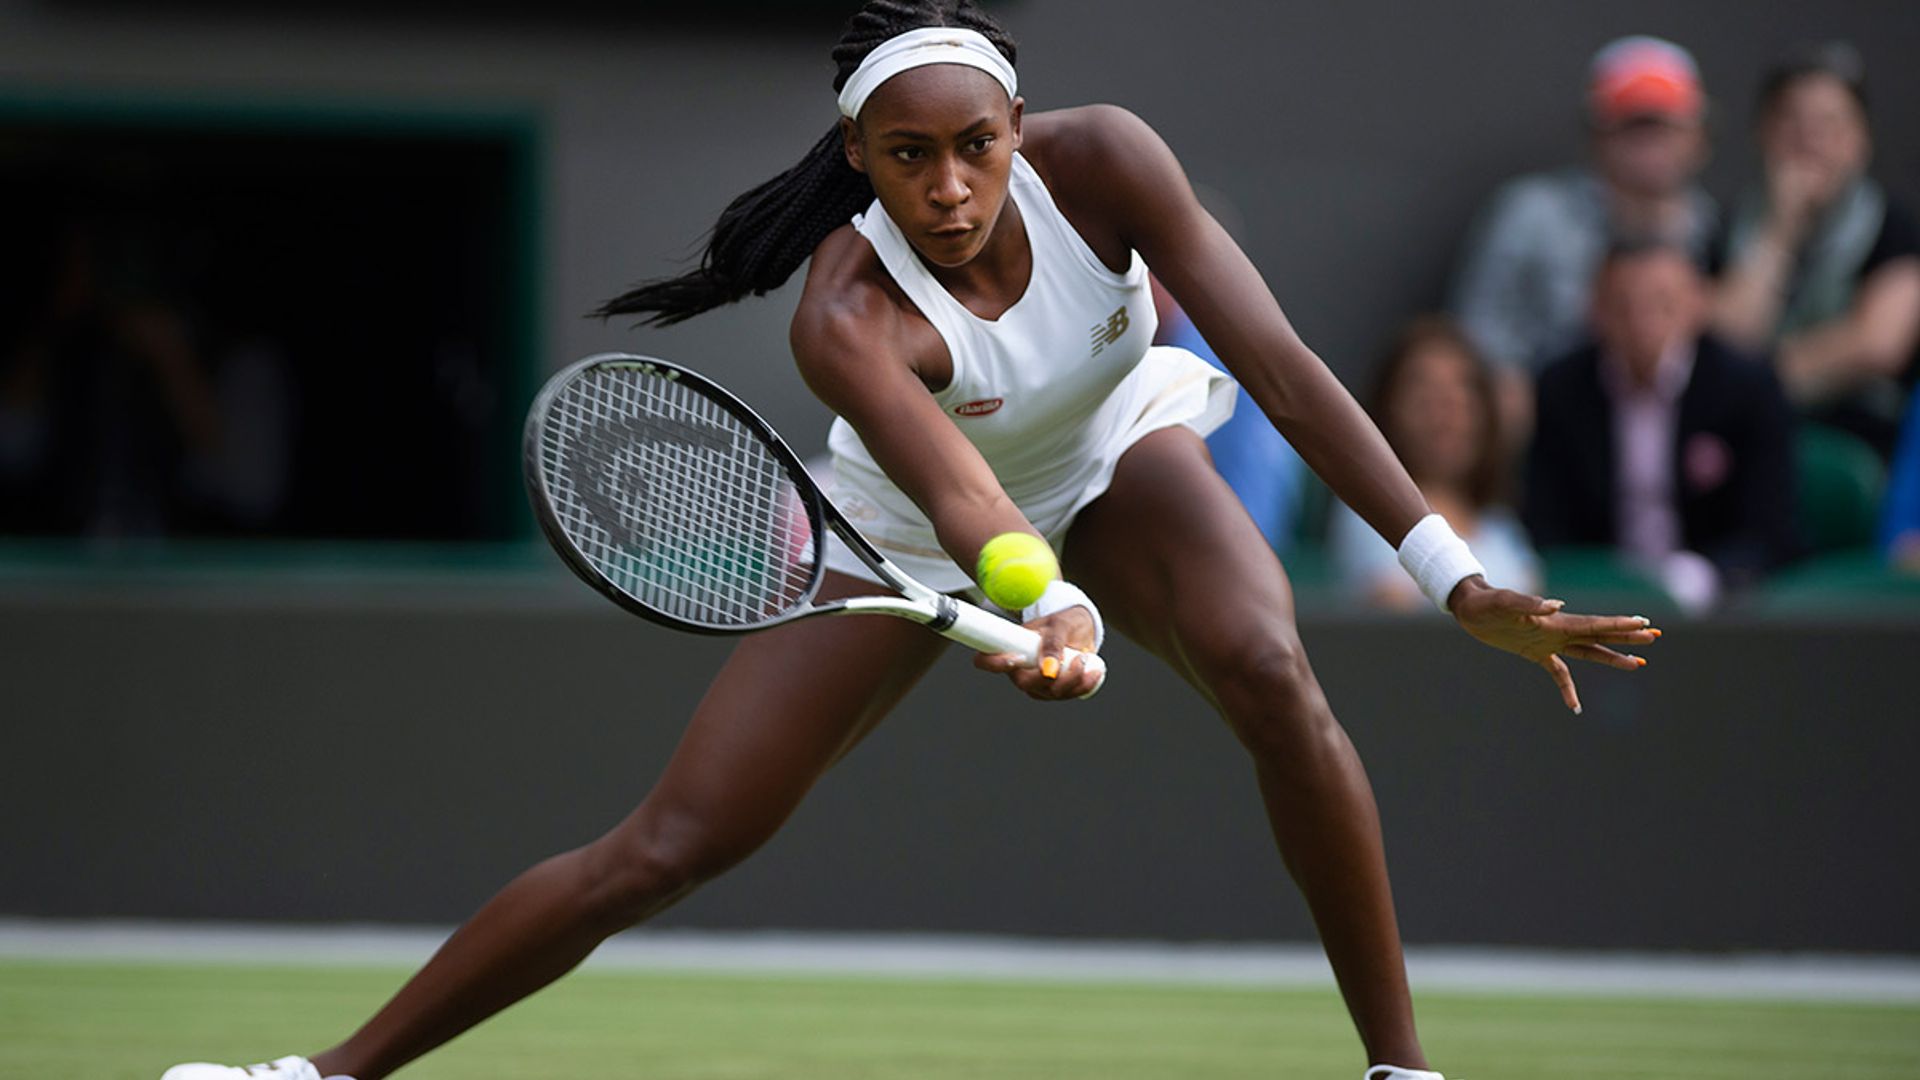 Everything you need to know about teenage Wimbledon sensation Coco Gauff